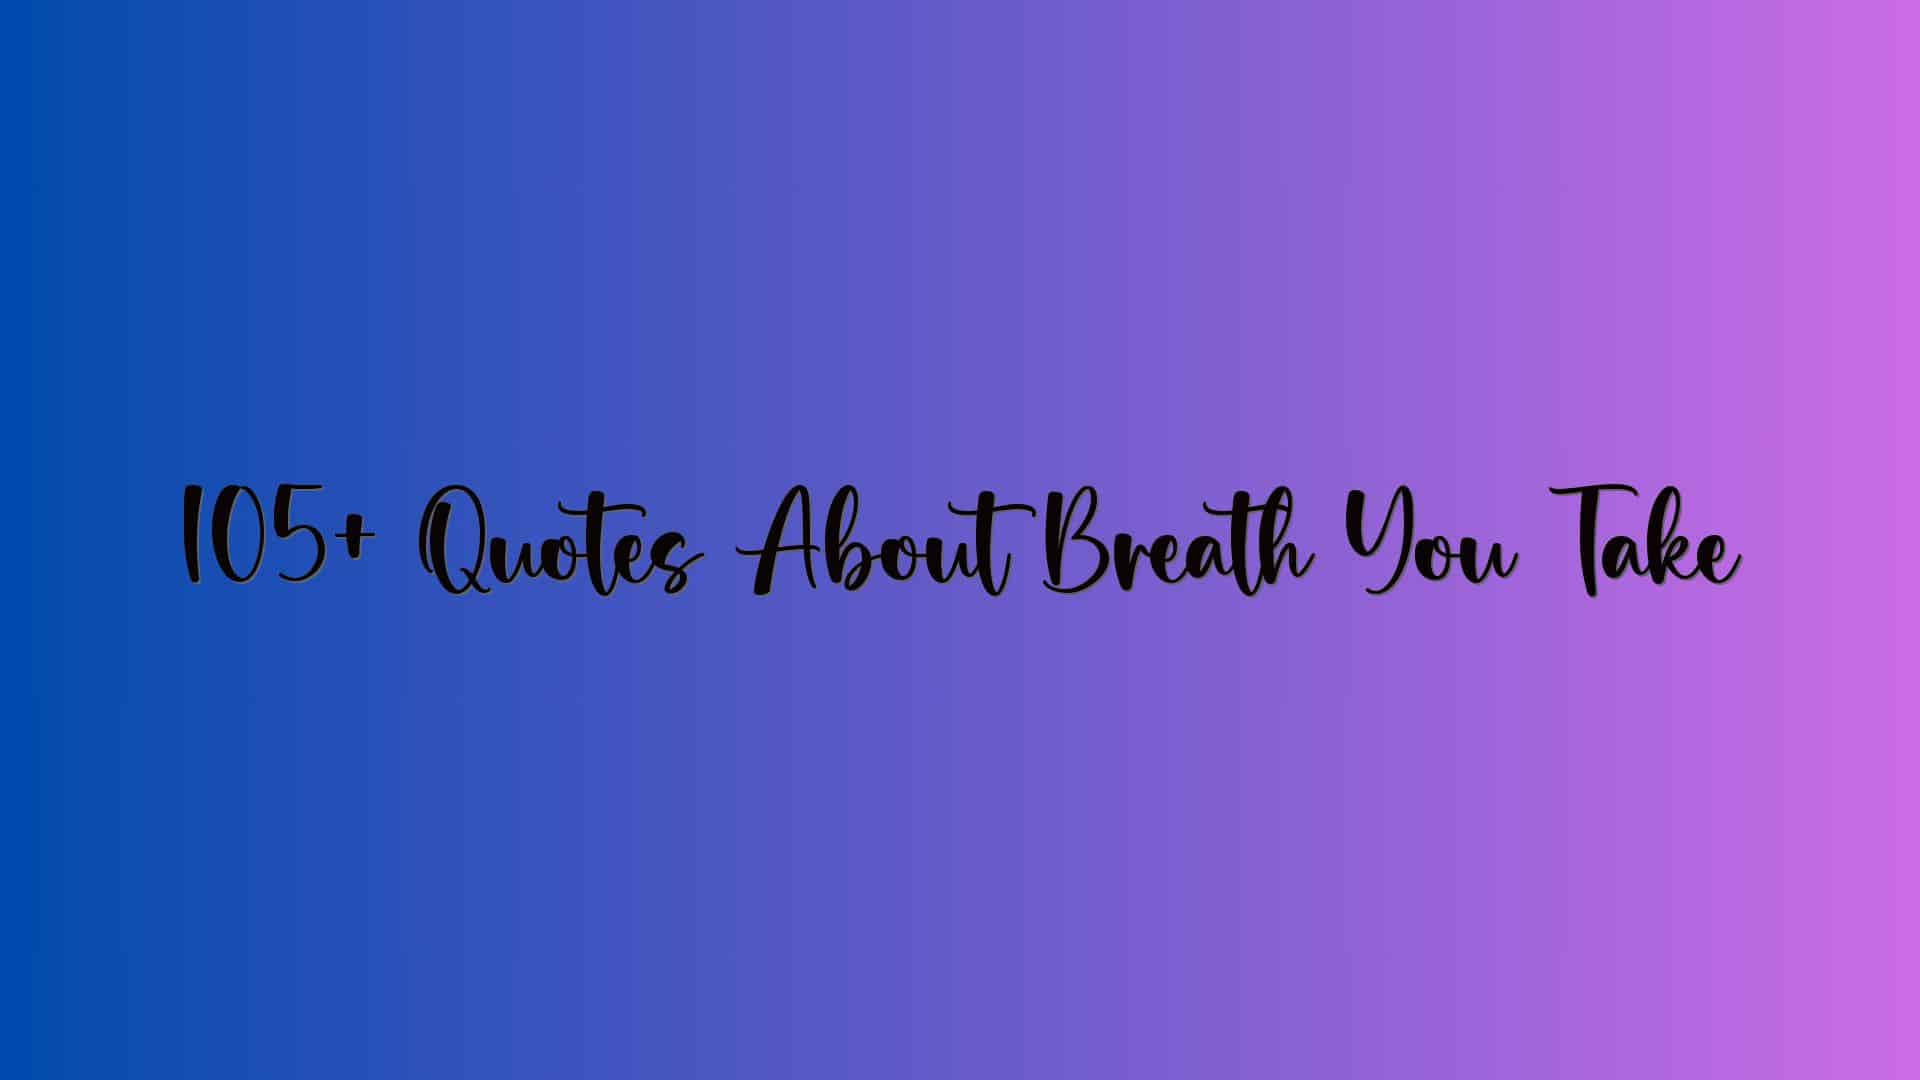 105+ Quotes About Breath You Take